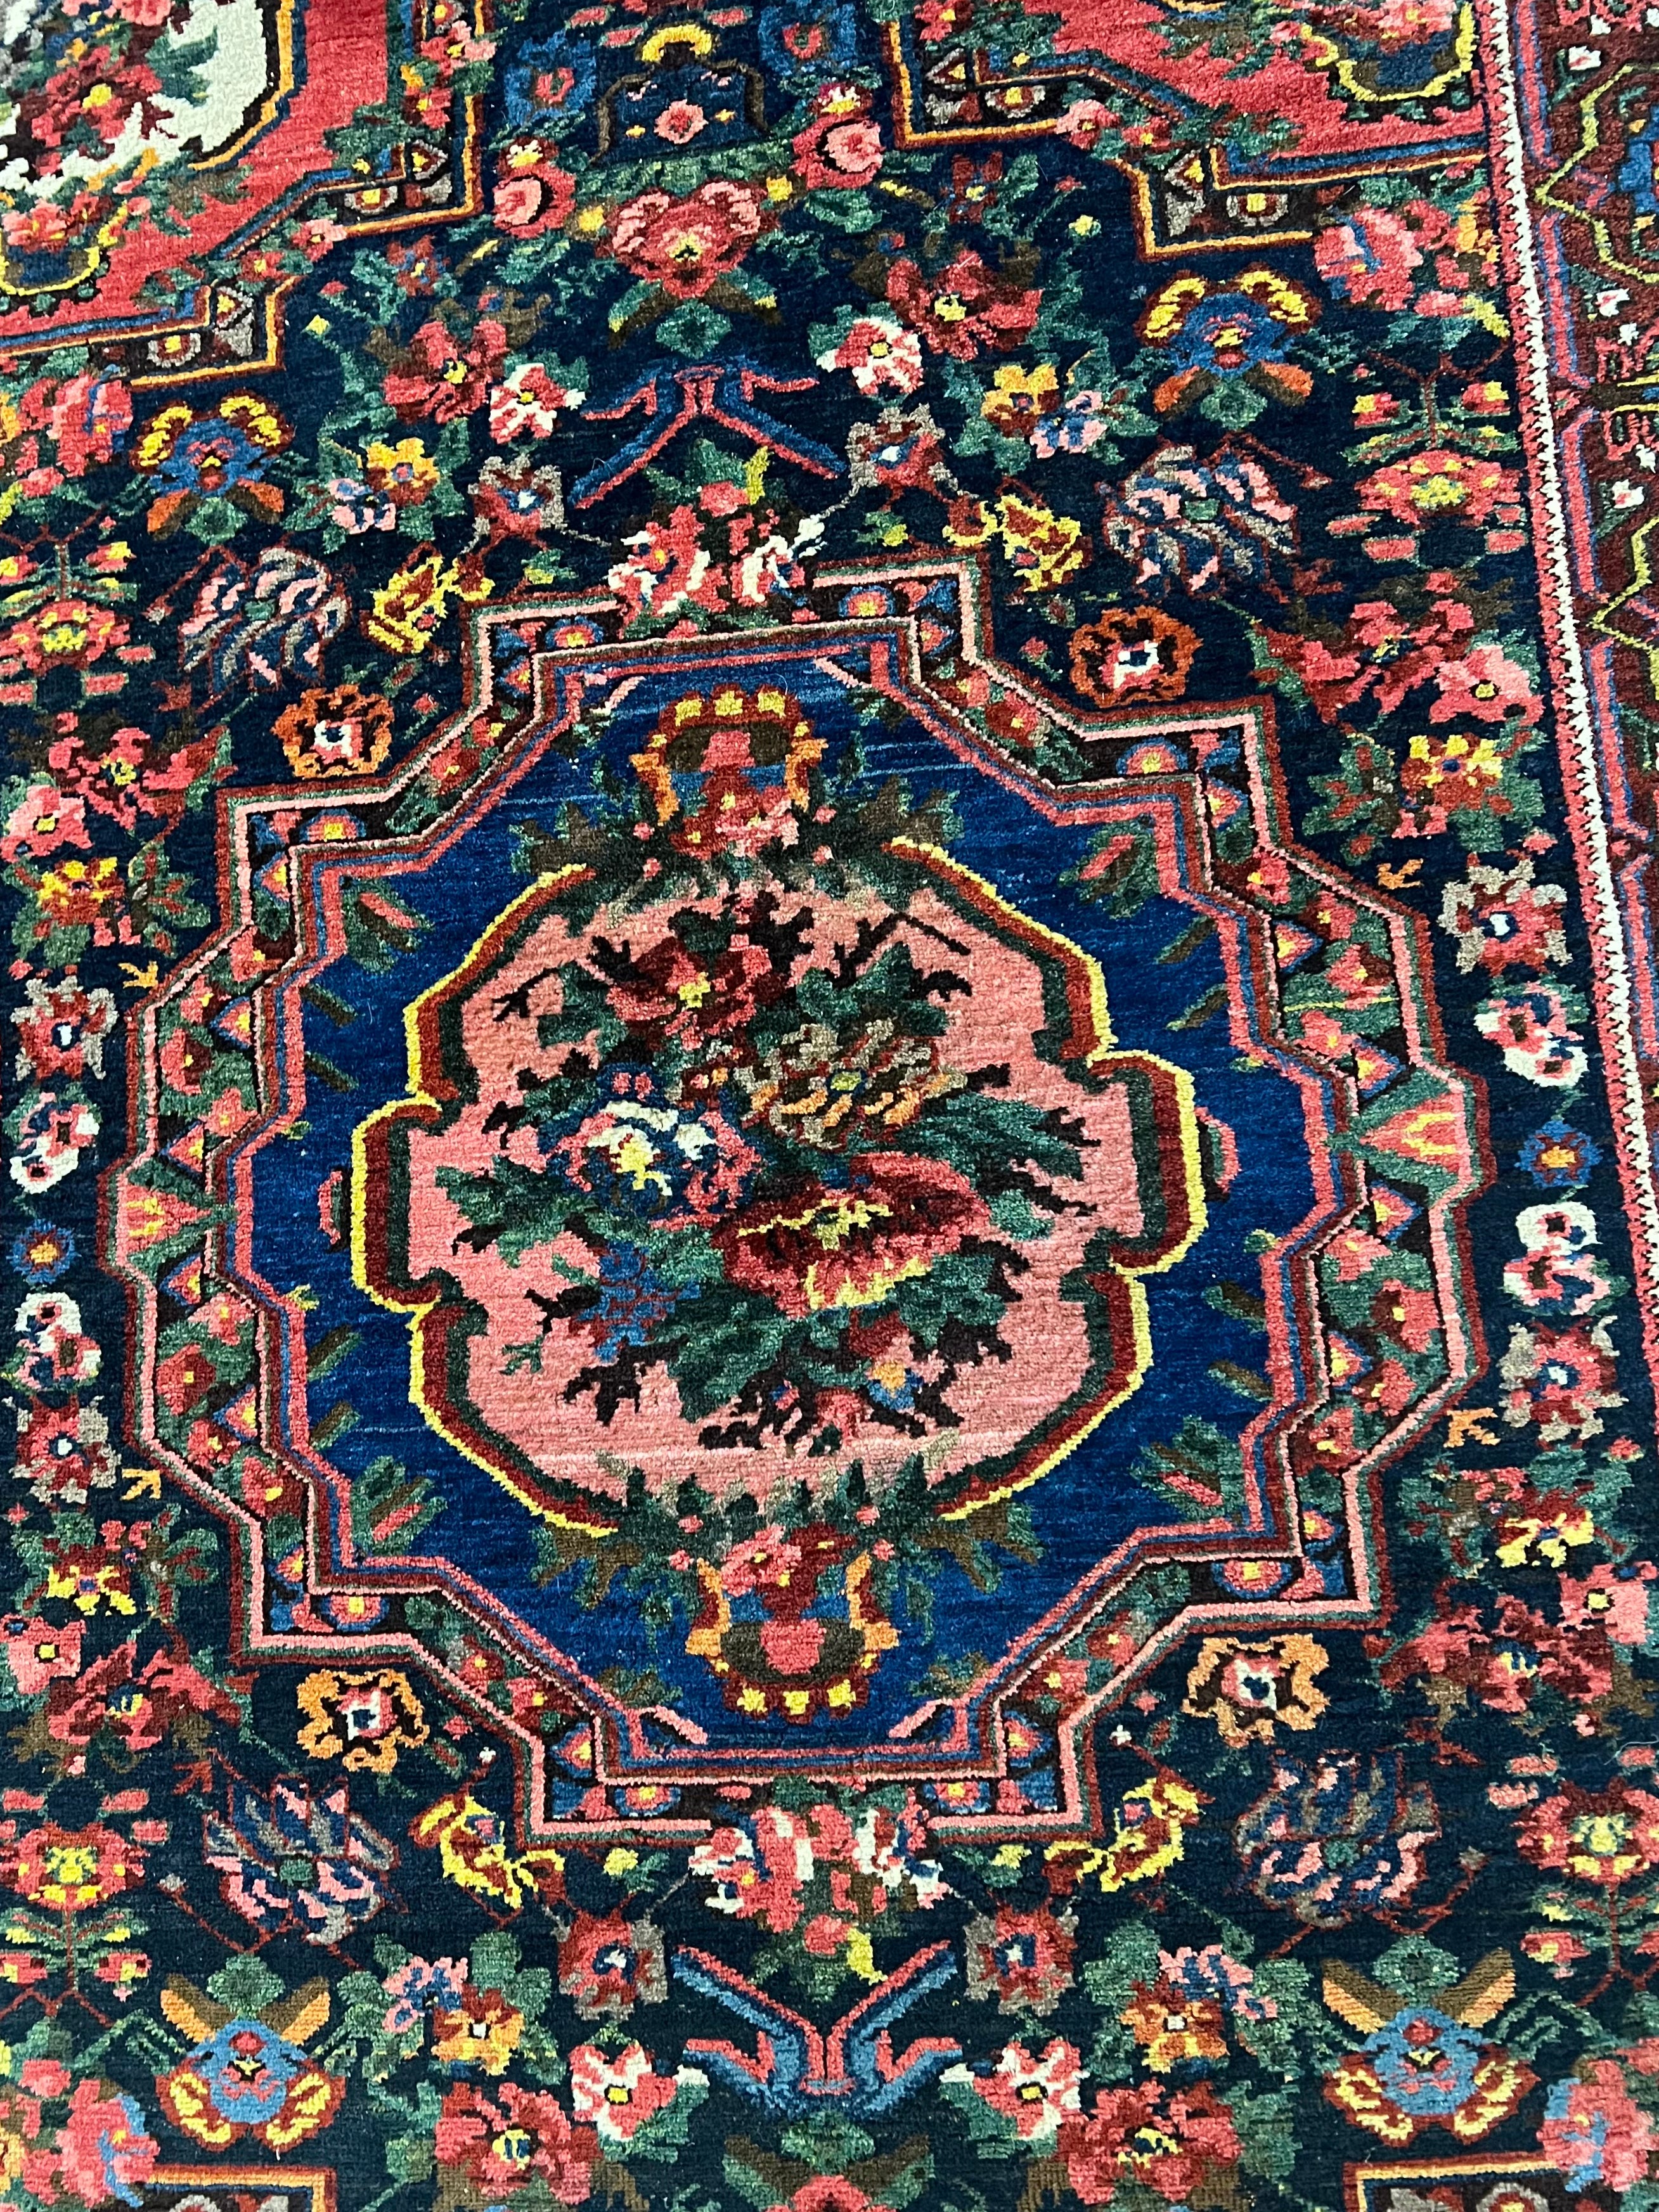 Antique 5.6x7.8 Southwest Persian Bakhtiari Rug Red, Pink, and Blue